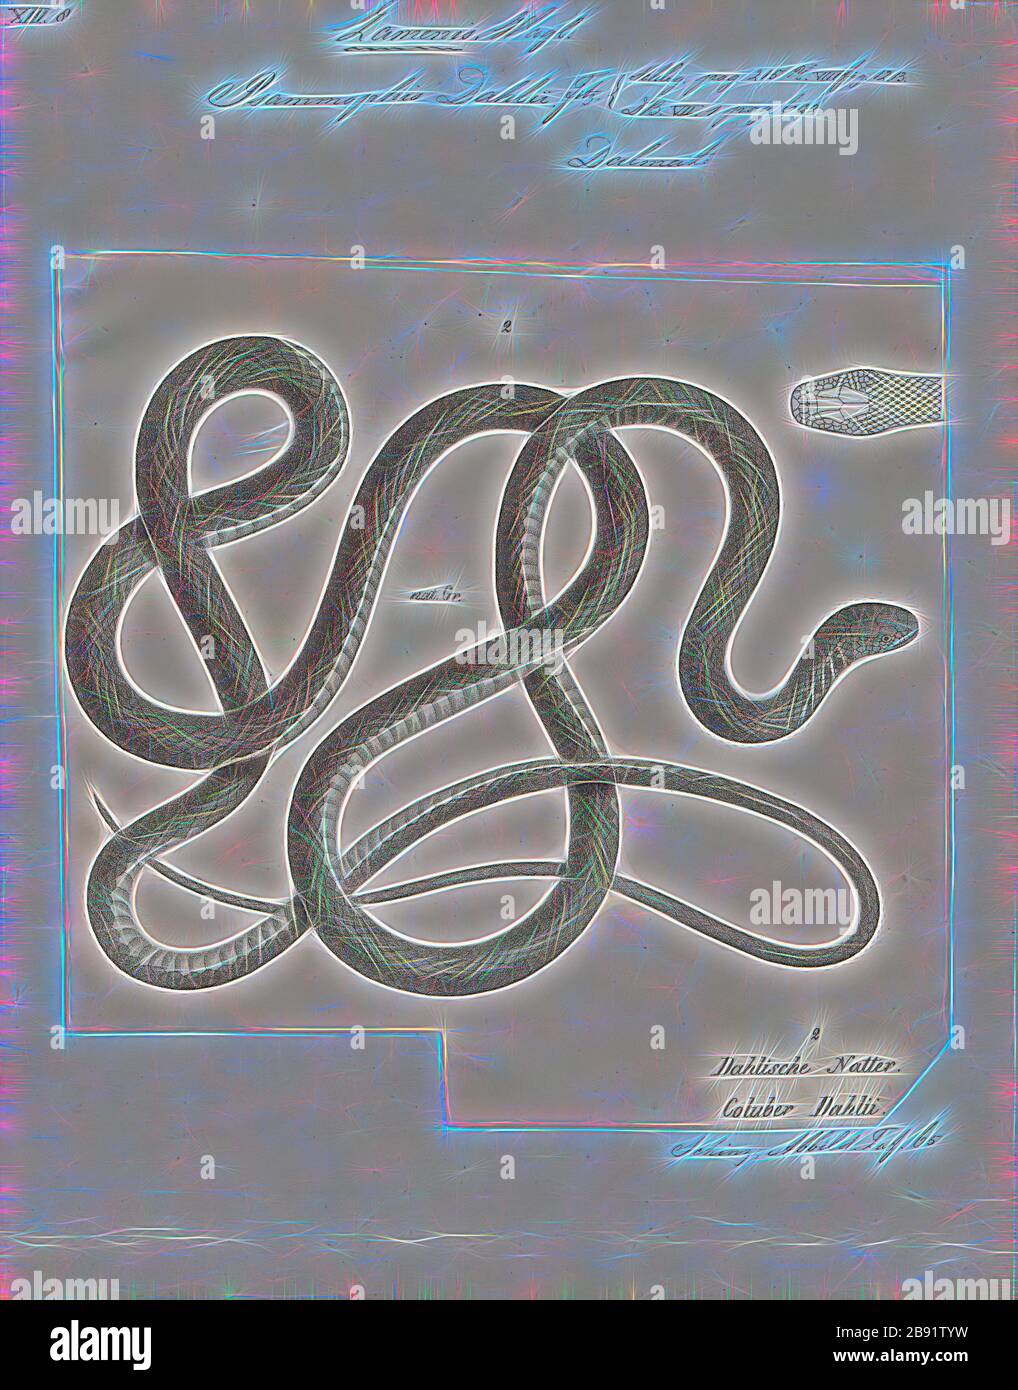 Psammophis dahlii, Print, Psammophis is a genus of snakes in the family Lamprophiidae. The genus comprises 34 species, which are found in Africa and Asia. Psammophis are diurnal and prey on lizards and rodents which they actively hunt. All species in the genus are venomous, and the venom is considered mild and not dangerous to humans., 1700-1880, Reimagined by Gibon, design of warm cheerful glowing of brightness and light rays radiance. Classic art reinvented with a modern twist. Photography inspired by futurism, embracing dynamic energy of modern technology, movement, speed and revolutionize Stock Photo